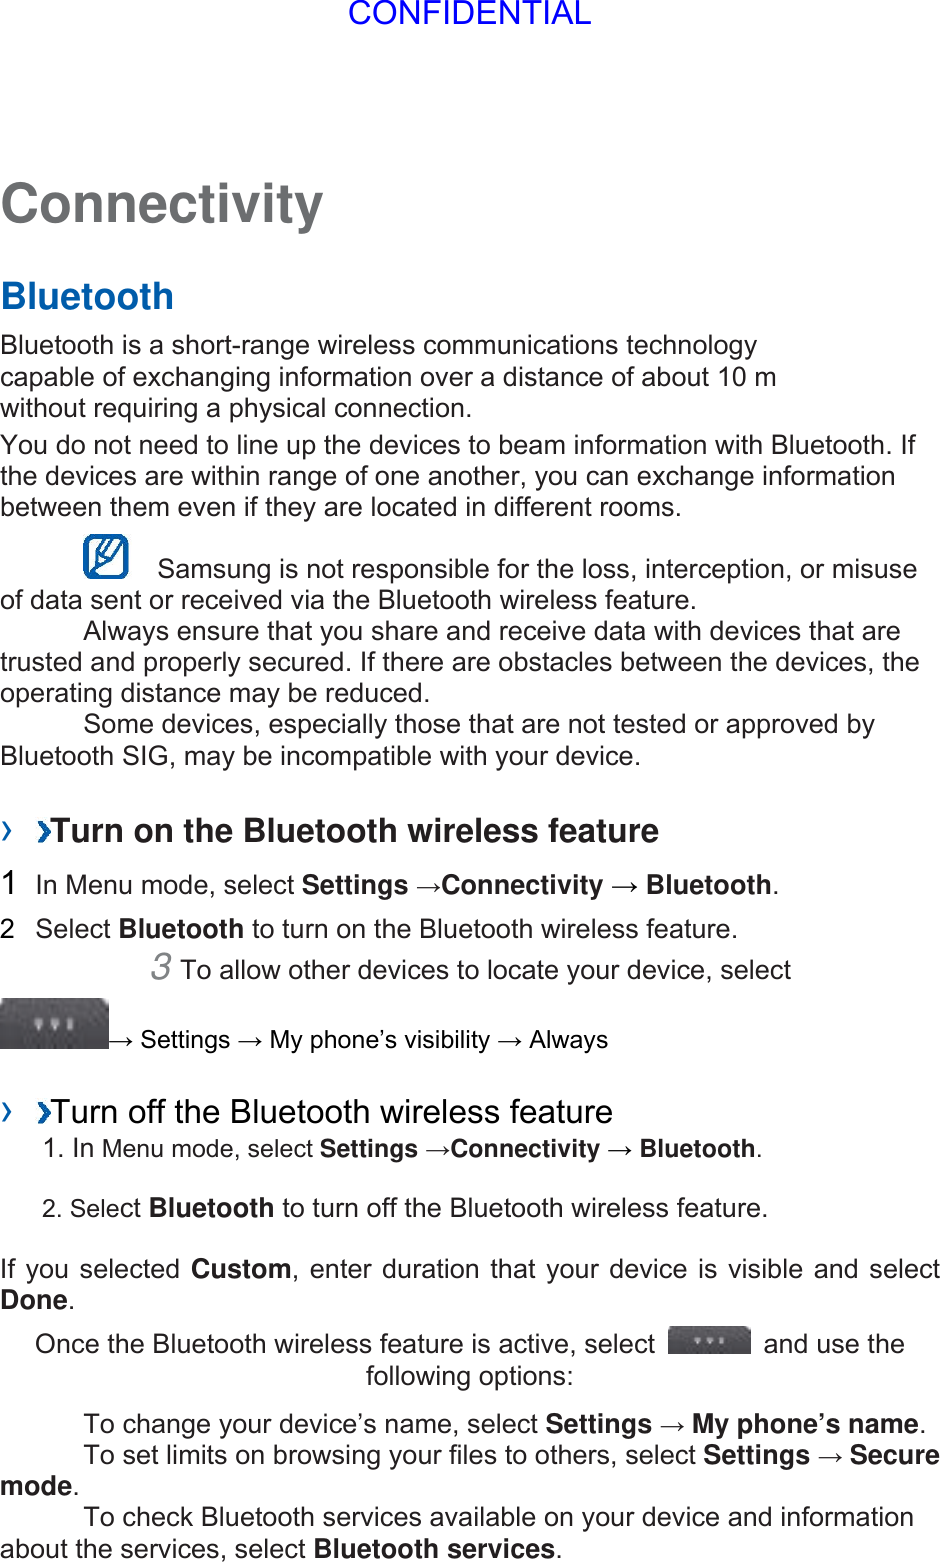 Connectivity   Bluetooth   Bluetooth is a short-range wireless communications technology capable of exchanging information over a distance of about 10 m without requiring a physical connection.   You do not need to line up the devices to beam information with Bluetooth. If the devices are within range of one another, you can exchange information between them even if they are located in different rooms.      Samsung is not responsible for the loss, interception, or misuse of data sent or received via the Bluetooth wireless feature.     Always ensure that you share and receive data with devices that are trusted and properly secured. If there are obstacles between the devices, the operating distance may be reduced.     Some devices, especially those that are not tested or approved by Bluetooth SIG, may be incompatible with your device.    ›  Turn on the Bluetooth wireless feature   1  In Menu mode, select Settings →Connectivity → Bluetooth.  2  Select Bluetooth to turn on the Bluetooth wireless feature.   3 To allow other devices to locate your device, select   → Settings → My phone’s visibility → Always    ›  Turn off the Bluetooth wireless feature   1. In Menu mode, select Settings →Connectivity → Bluetooth. 2. Select Bluetooth to turn off the Bluetooth wireless feature. If you selected Custom, enter duration that your device is visible and select Done.  Once the Bluetooth wireless feature is active, select    and use the following options:     To change your device’s name, select Settings → My phone’s name.    To set limits on browsing your files to others, select Settings → Secure mode.    To check Bluetooth services available on your device and information about the services, select Bluetooth services.   CONFIDENTIAL